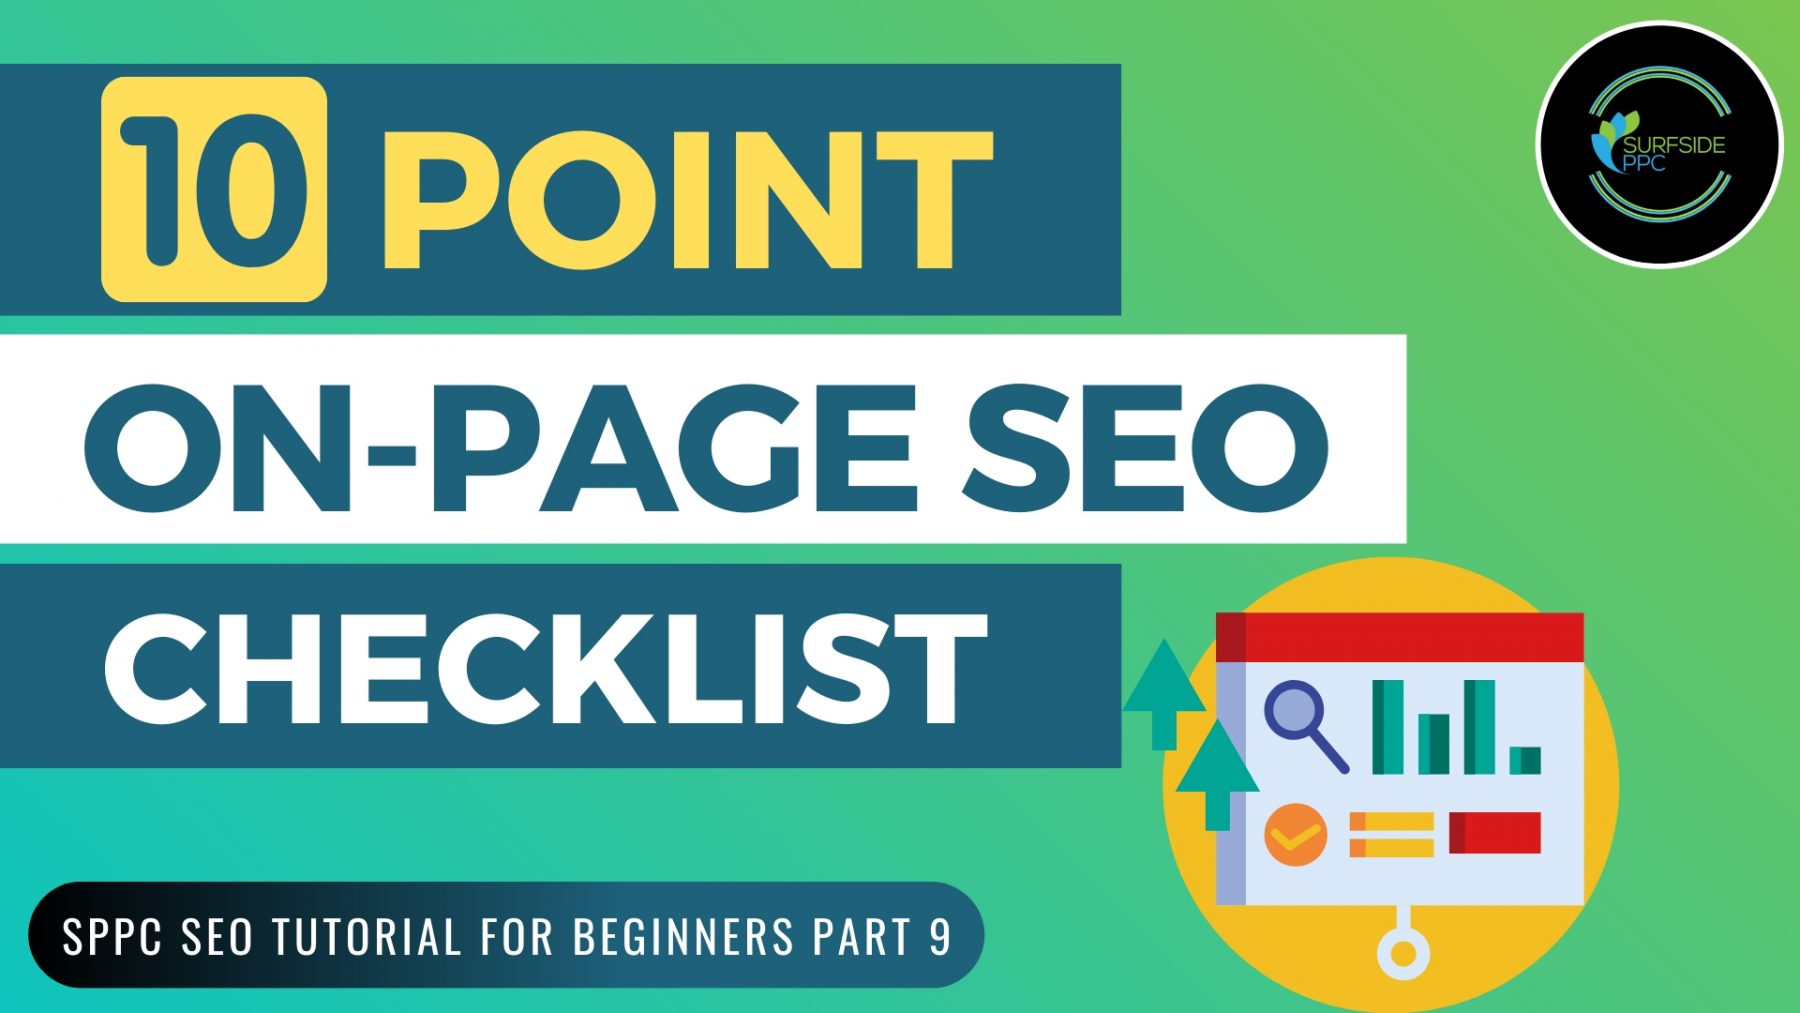 10 Point On-Page SEO Checklist and Tutorial 2020